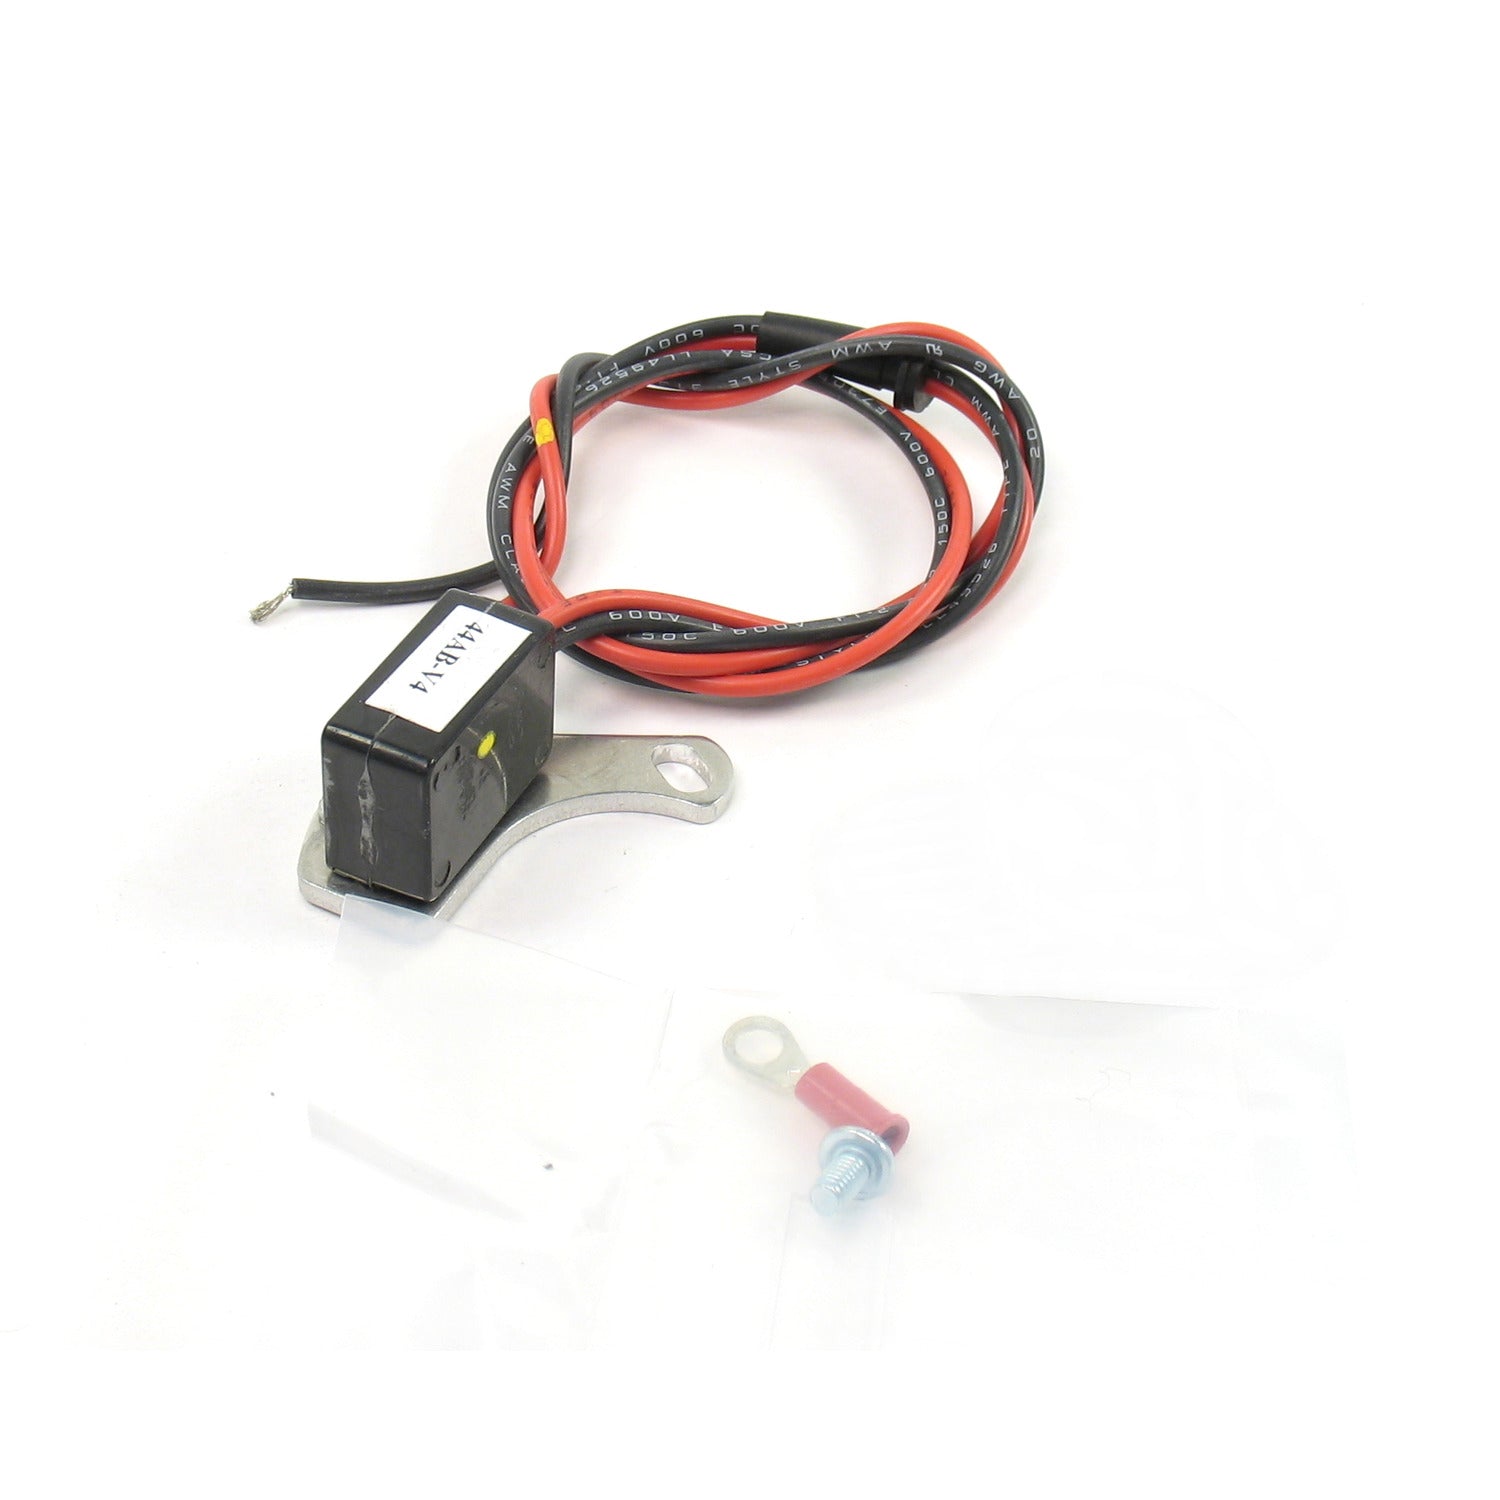 PerTronix AC-1810 Module replacement (only) (one module) for AC-181 Ignitor Kit